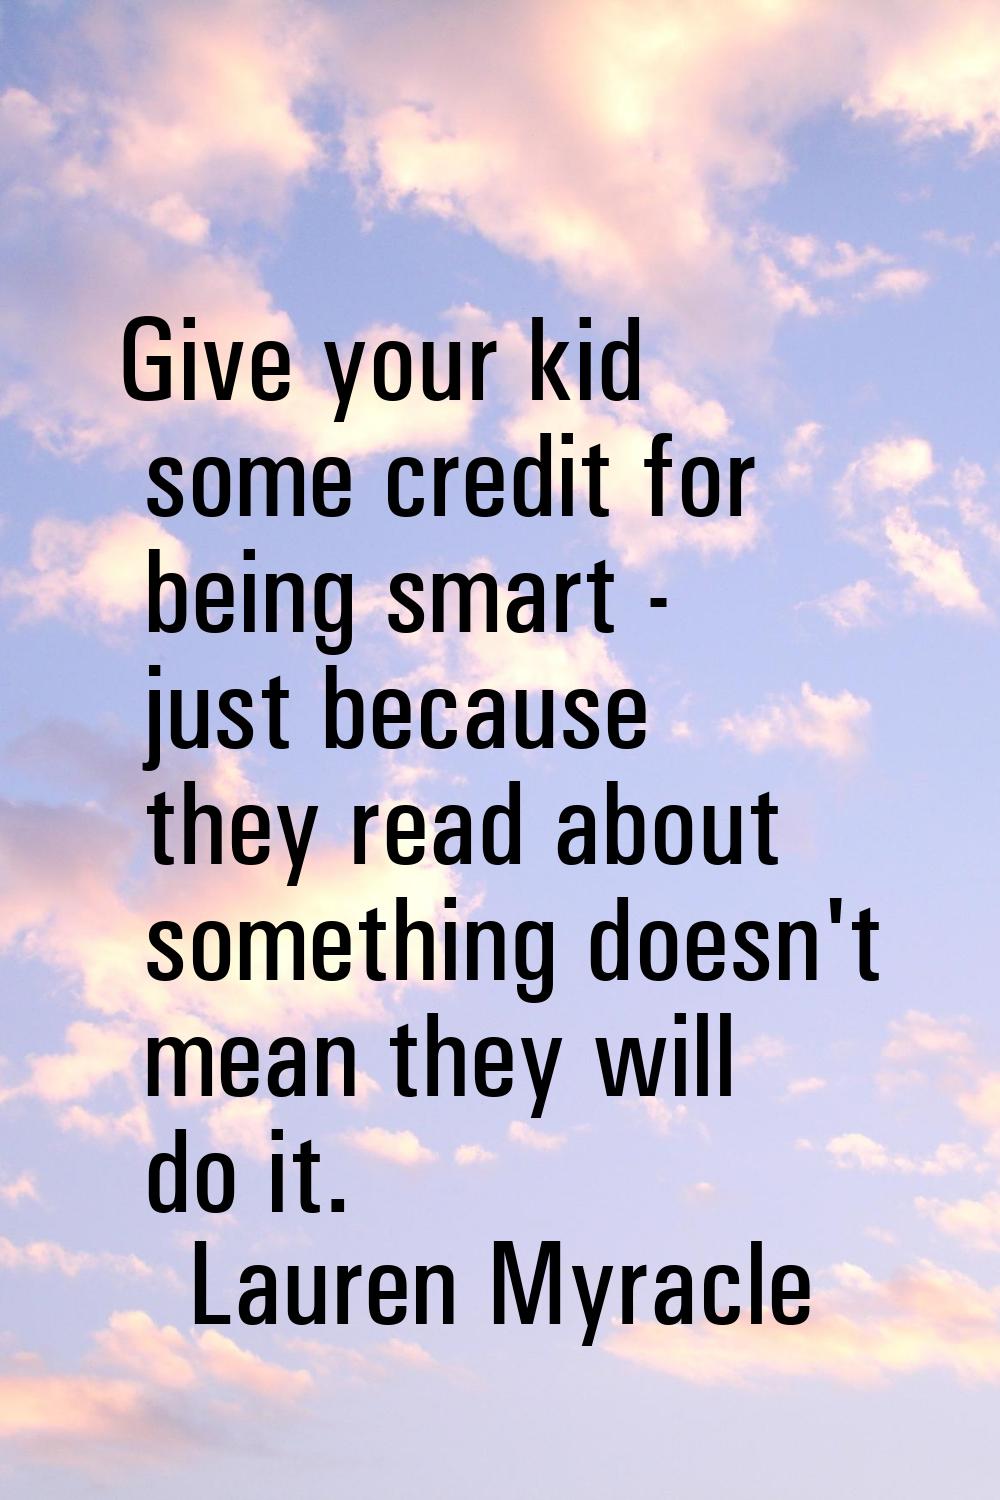 Give your kid some credit for being smart - just because they read about something doesn't mean the